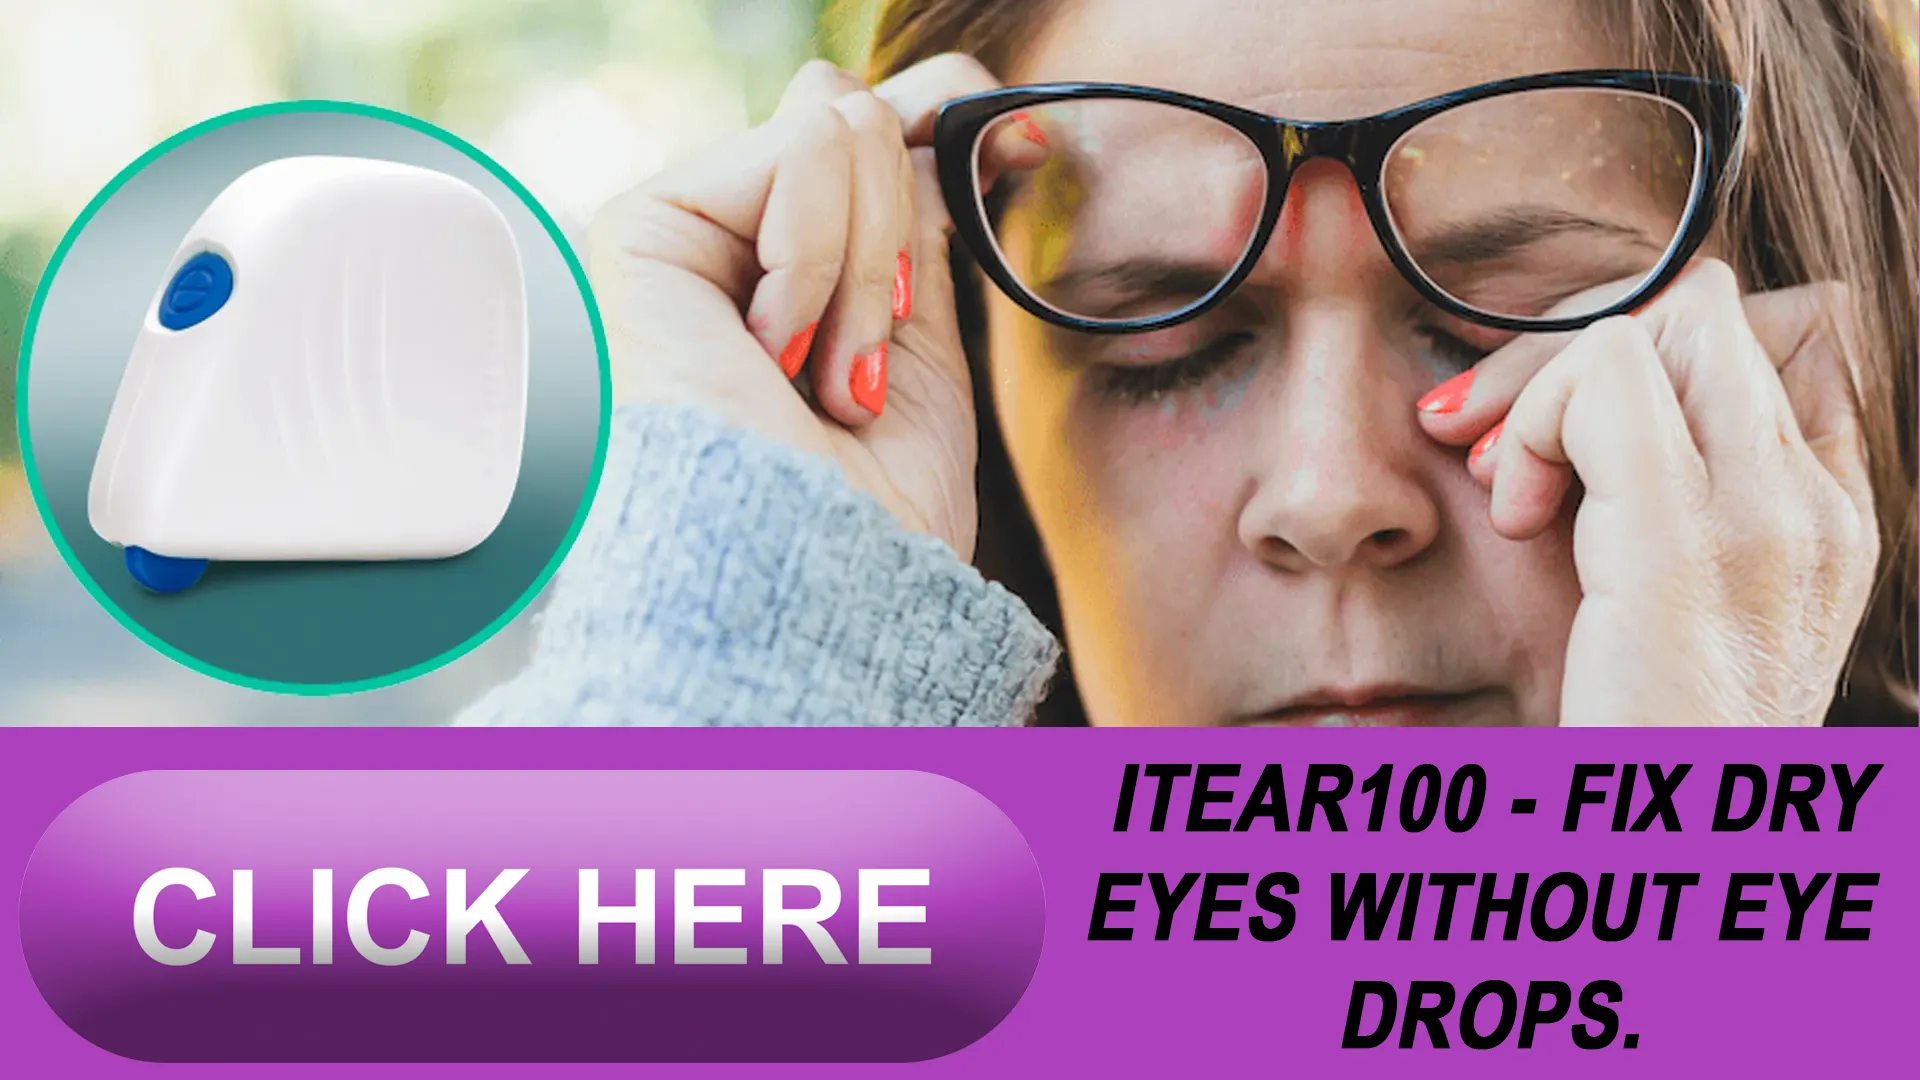 Who Can Benefit from iTear100?